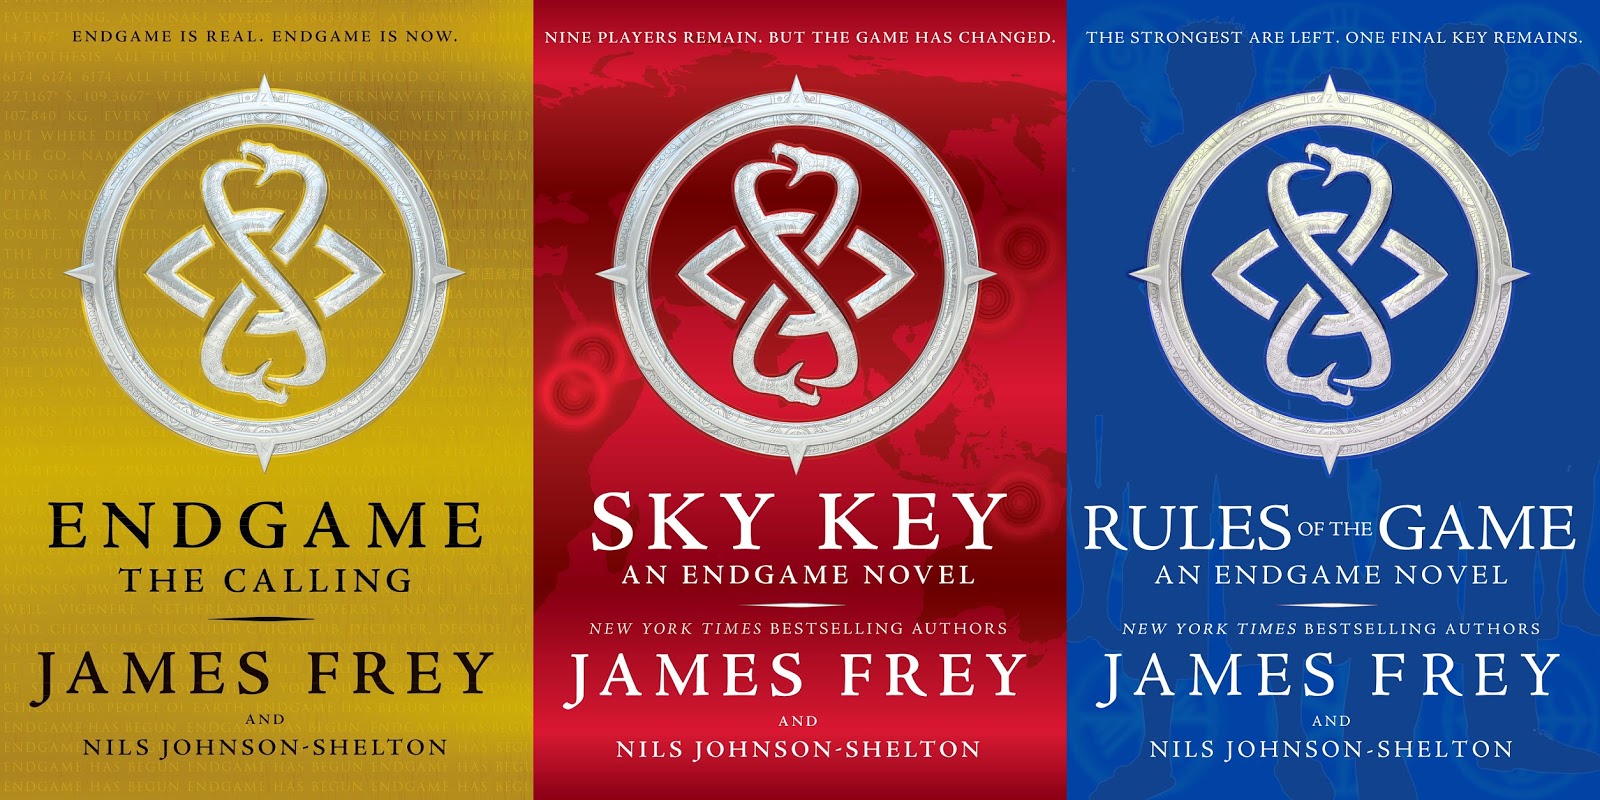 Endgame Trilogy Concludes With 'Rules Of The Game' By James Frey ...